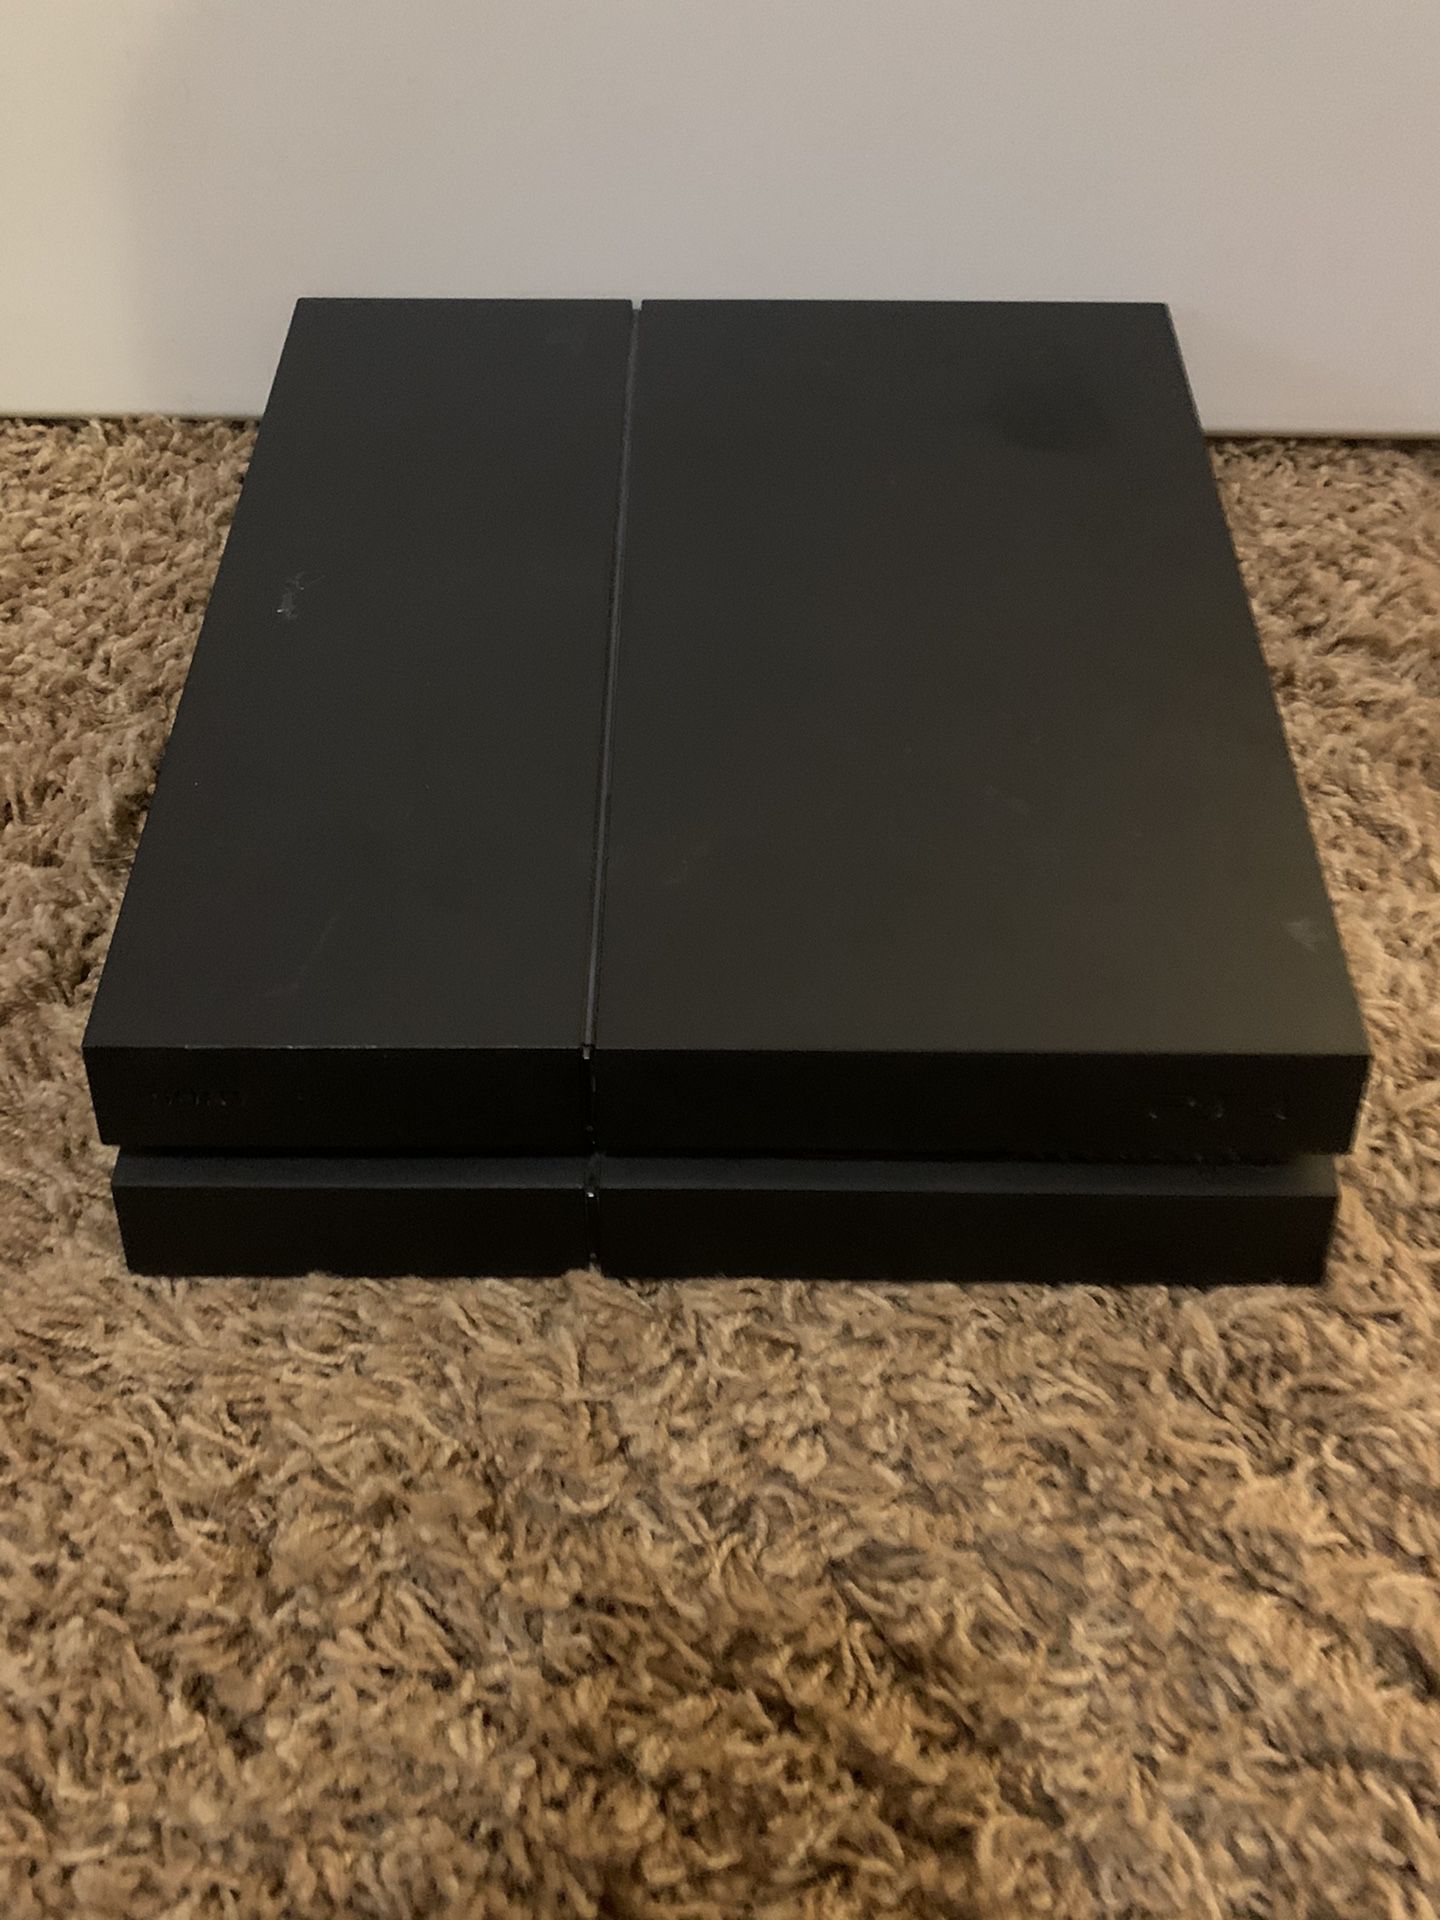 PS4 with 2 controllers and games